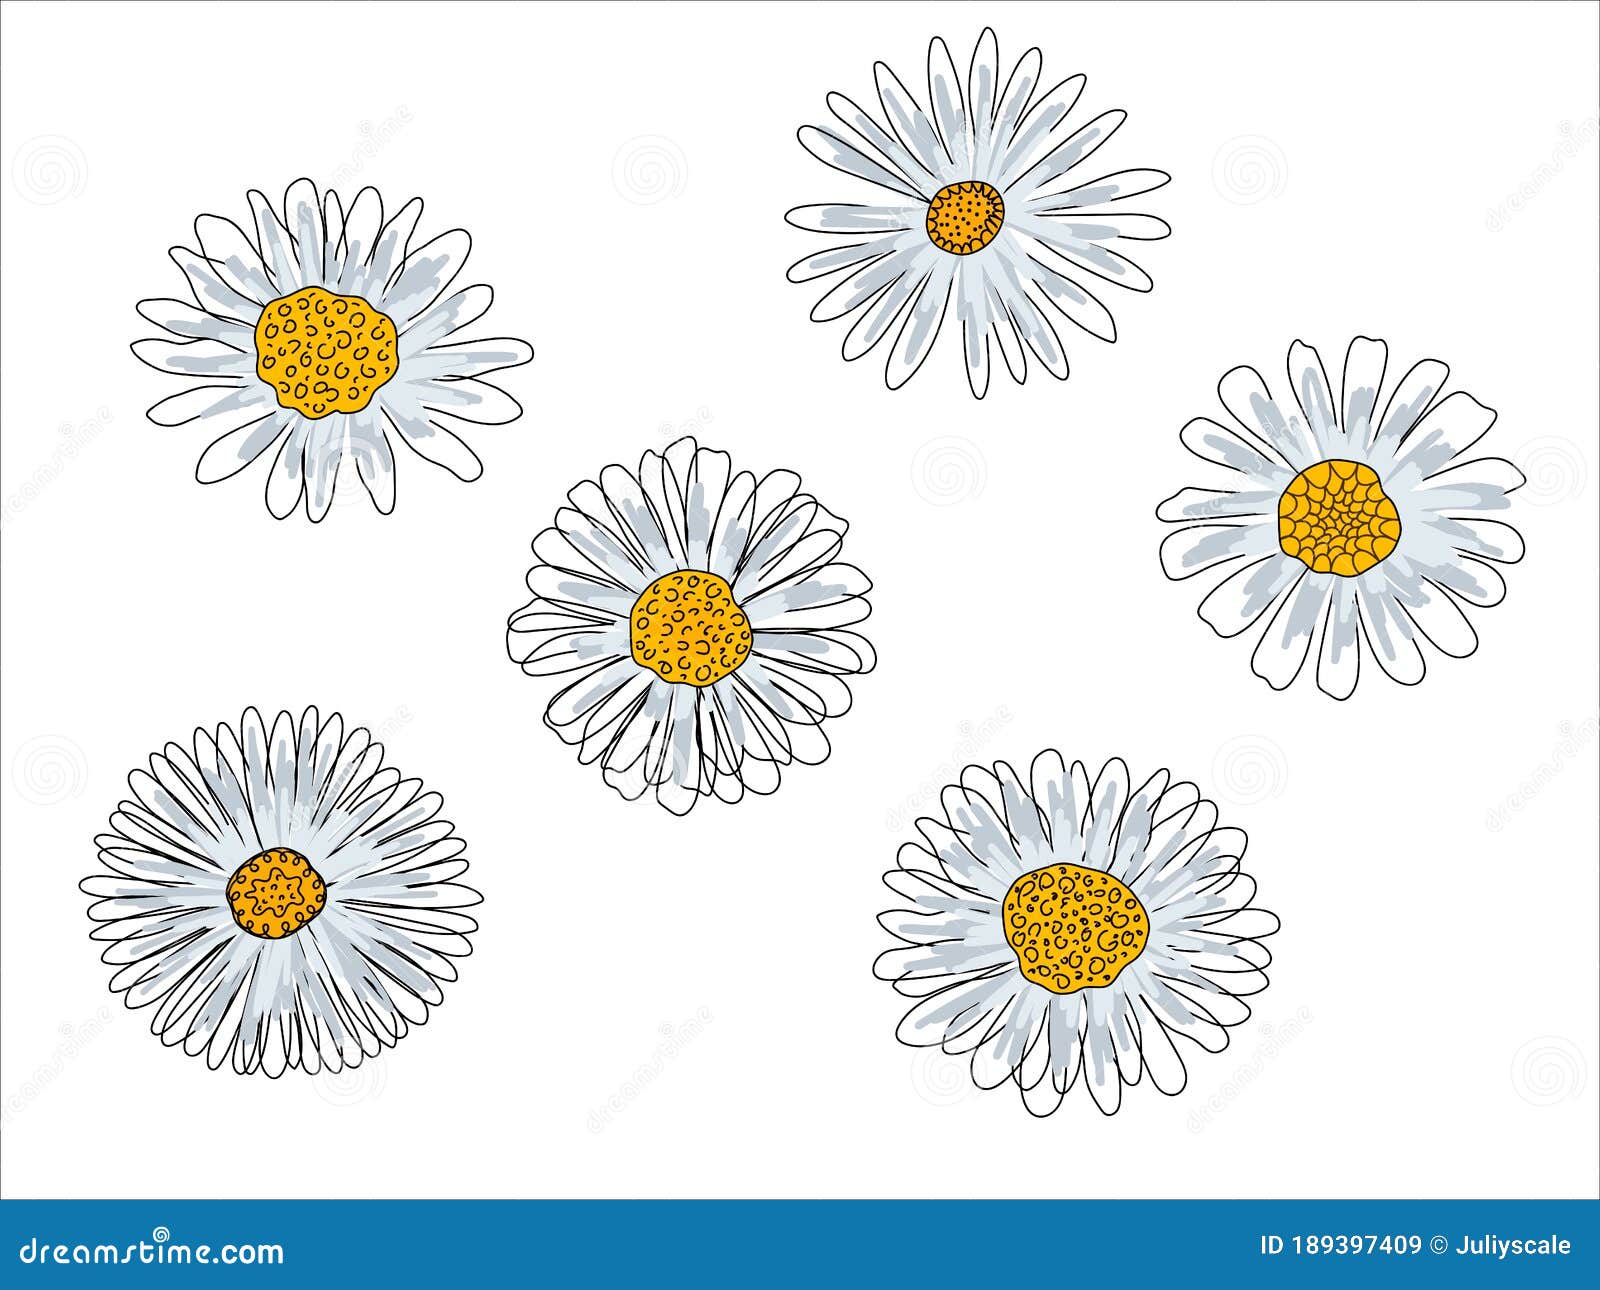 Daisies Solid Line Drawing. Seamless Texture. Abstract Minimal Daisy. Doodle  in Black and White. Vector Stock Vector - Illustration of pattern, color:  189397409